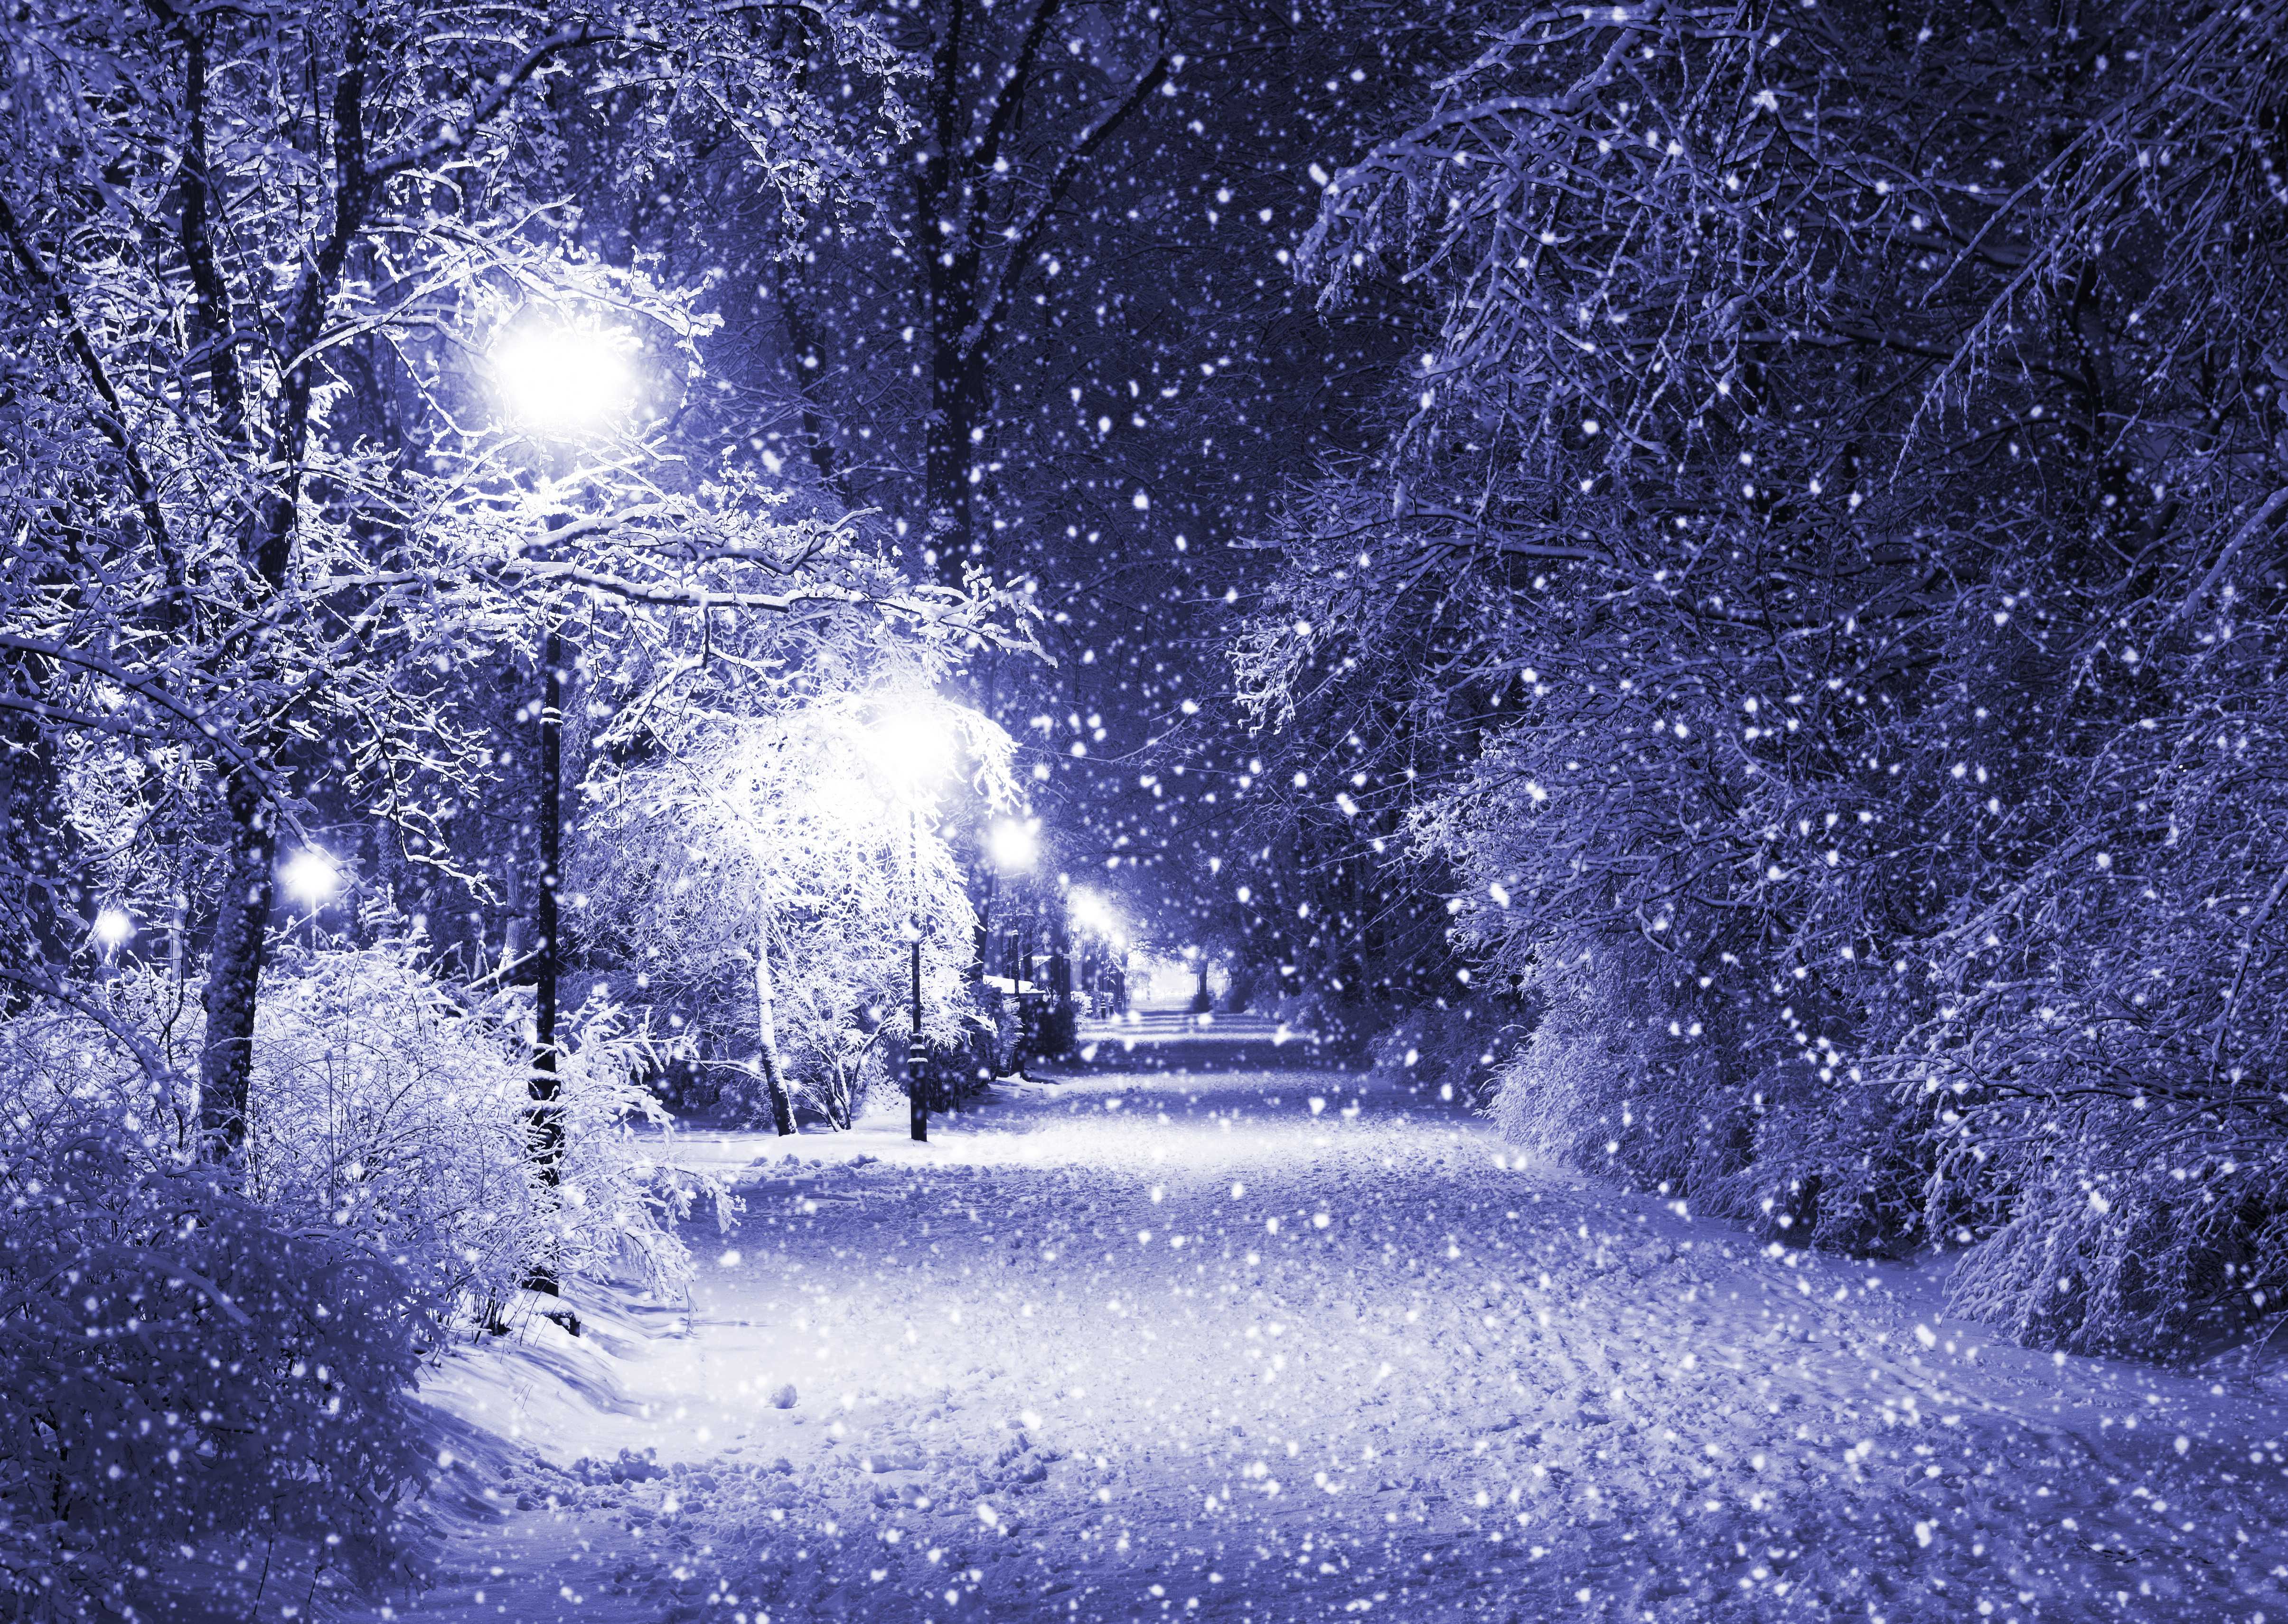 Snow Night Wallpapers Hd - Wallpaper Cave